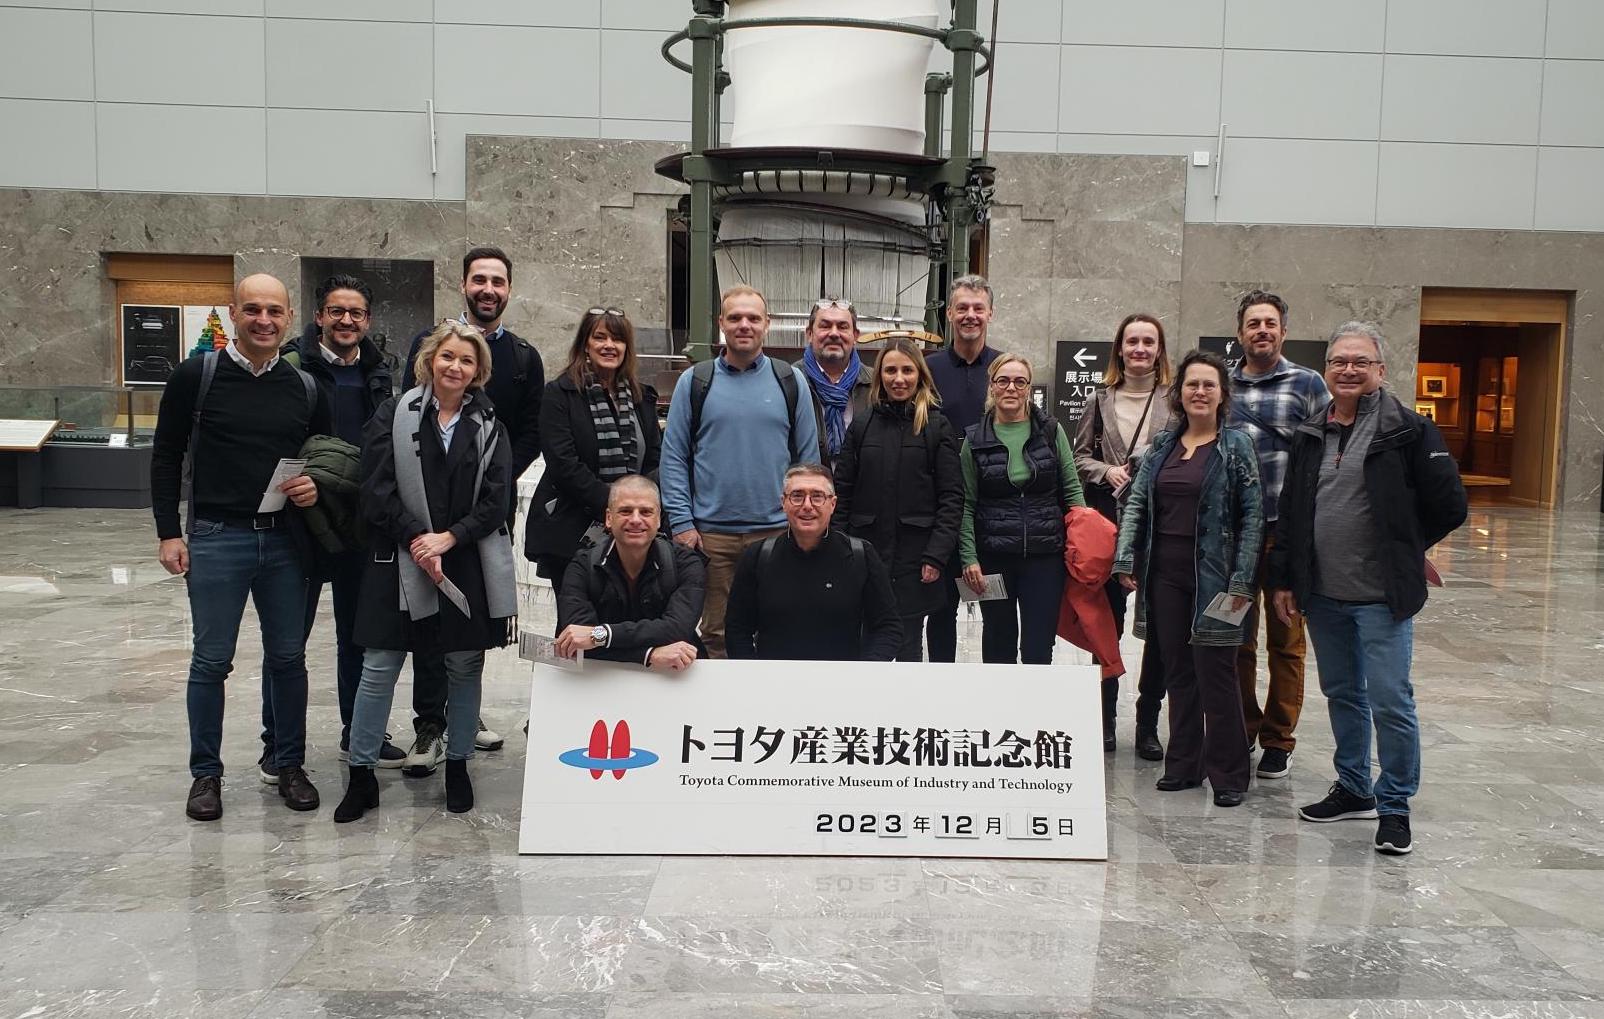 Travelers on the TWI Institute Japan tour pose for a picture in the lobby of the Toyota Commemorative Museum of Industry and Technology